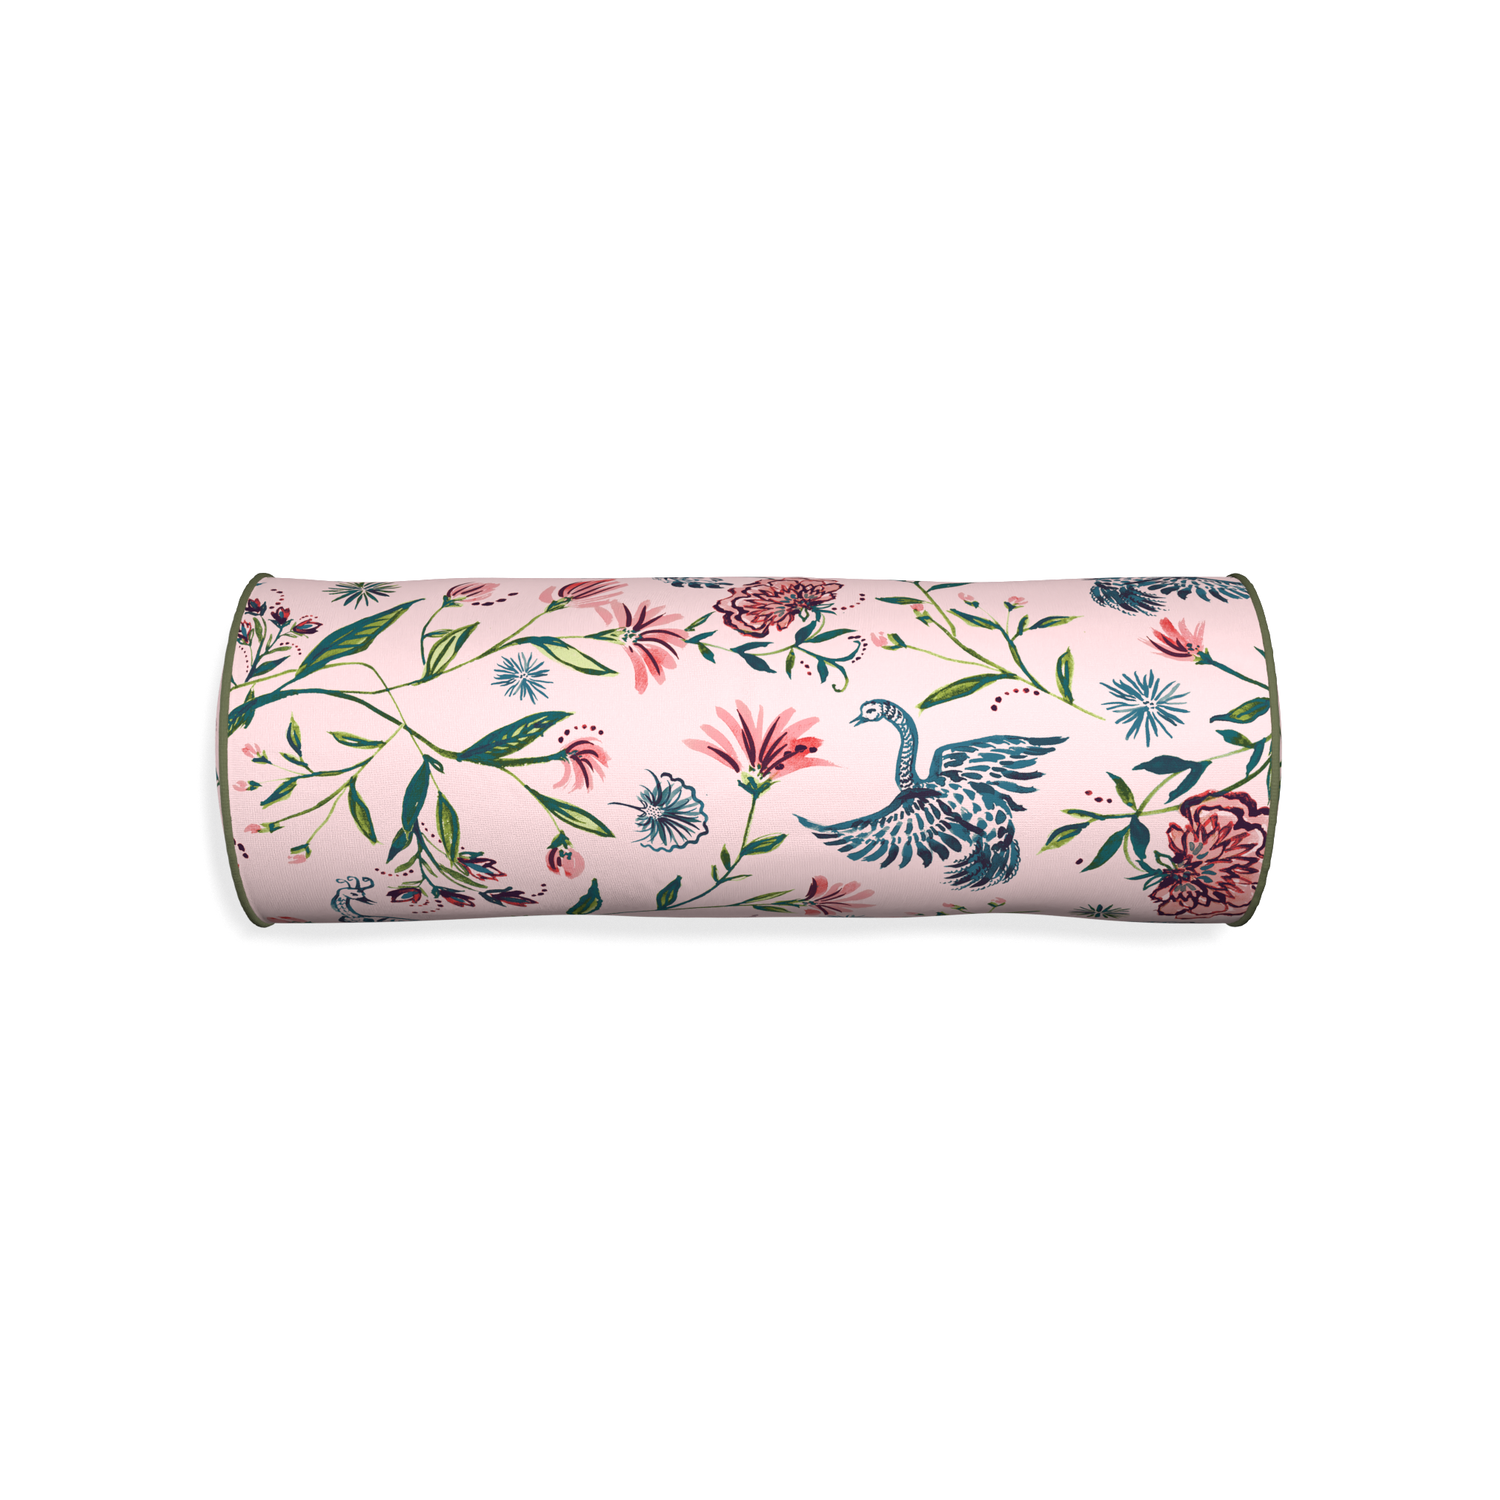 Bolster daphne rose custom rose chinoiseriepillow with f piping on white background